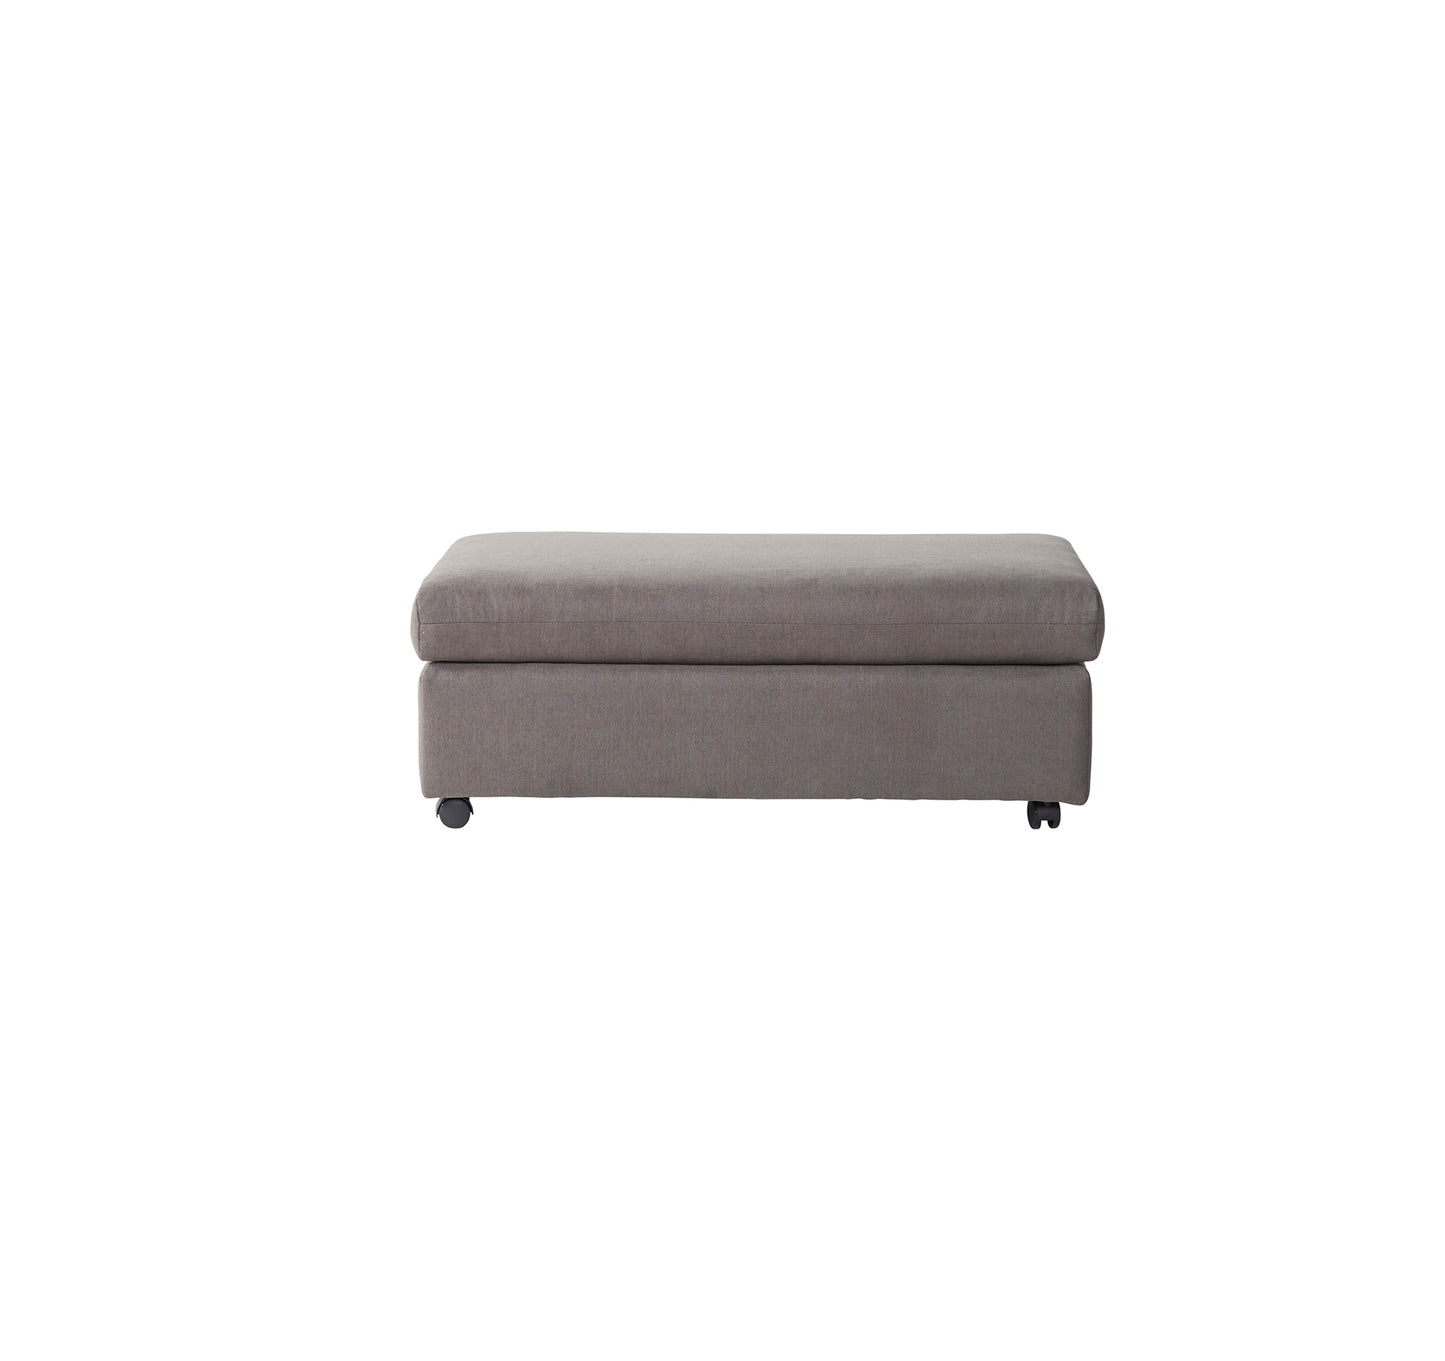 Image Carbon 18200 Sofa With Cuddle Chair Hughes Furniture